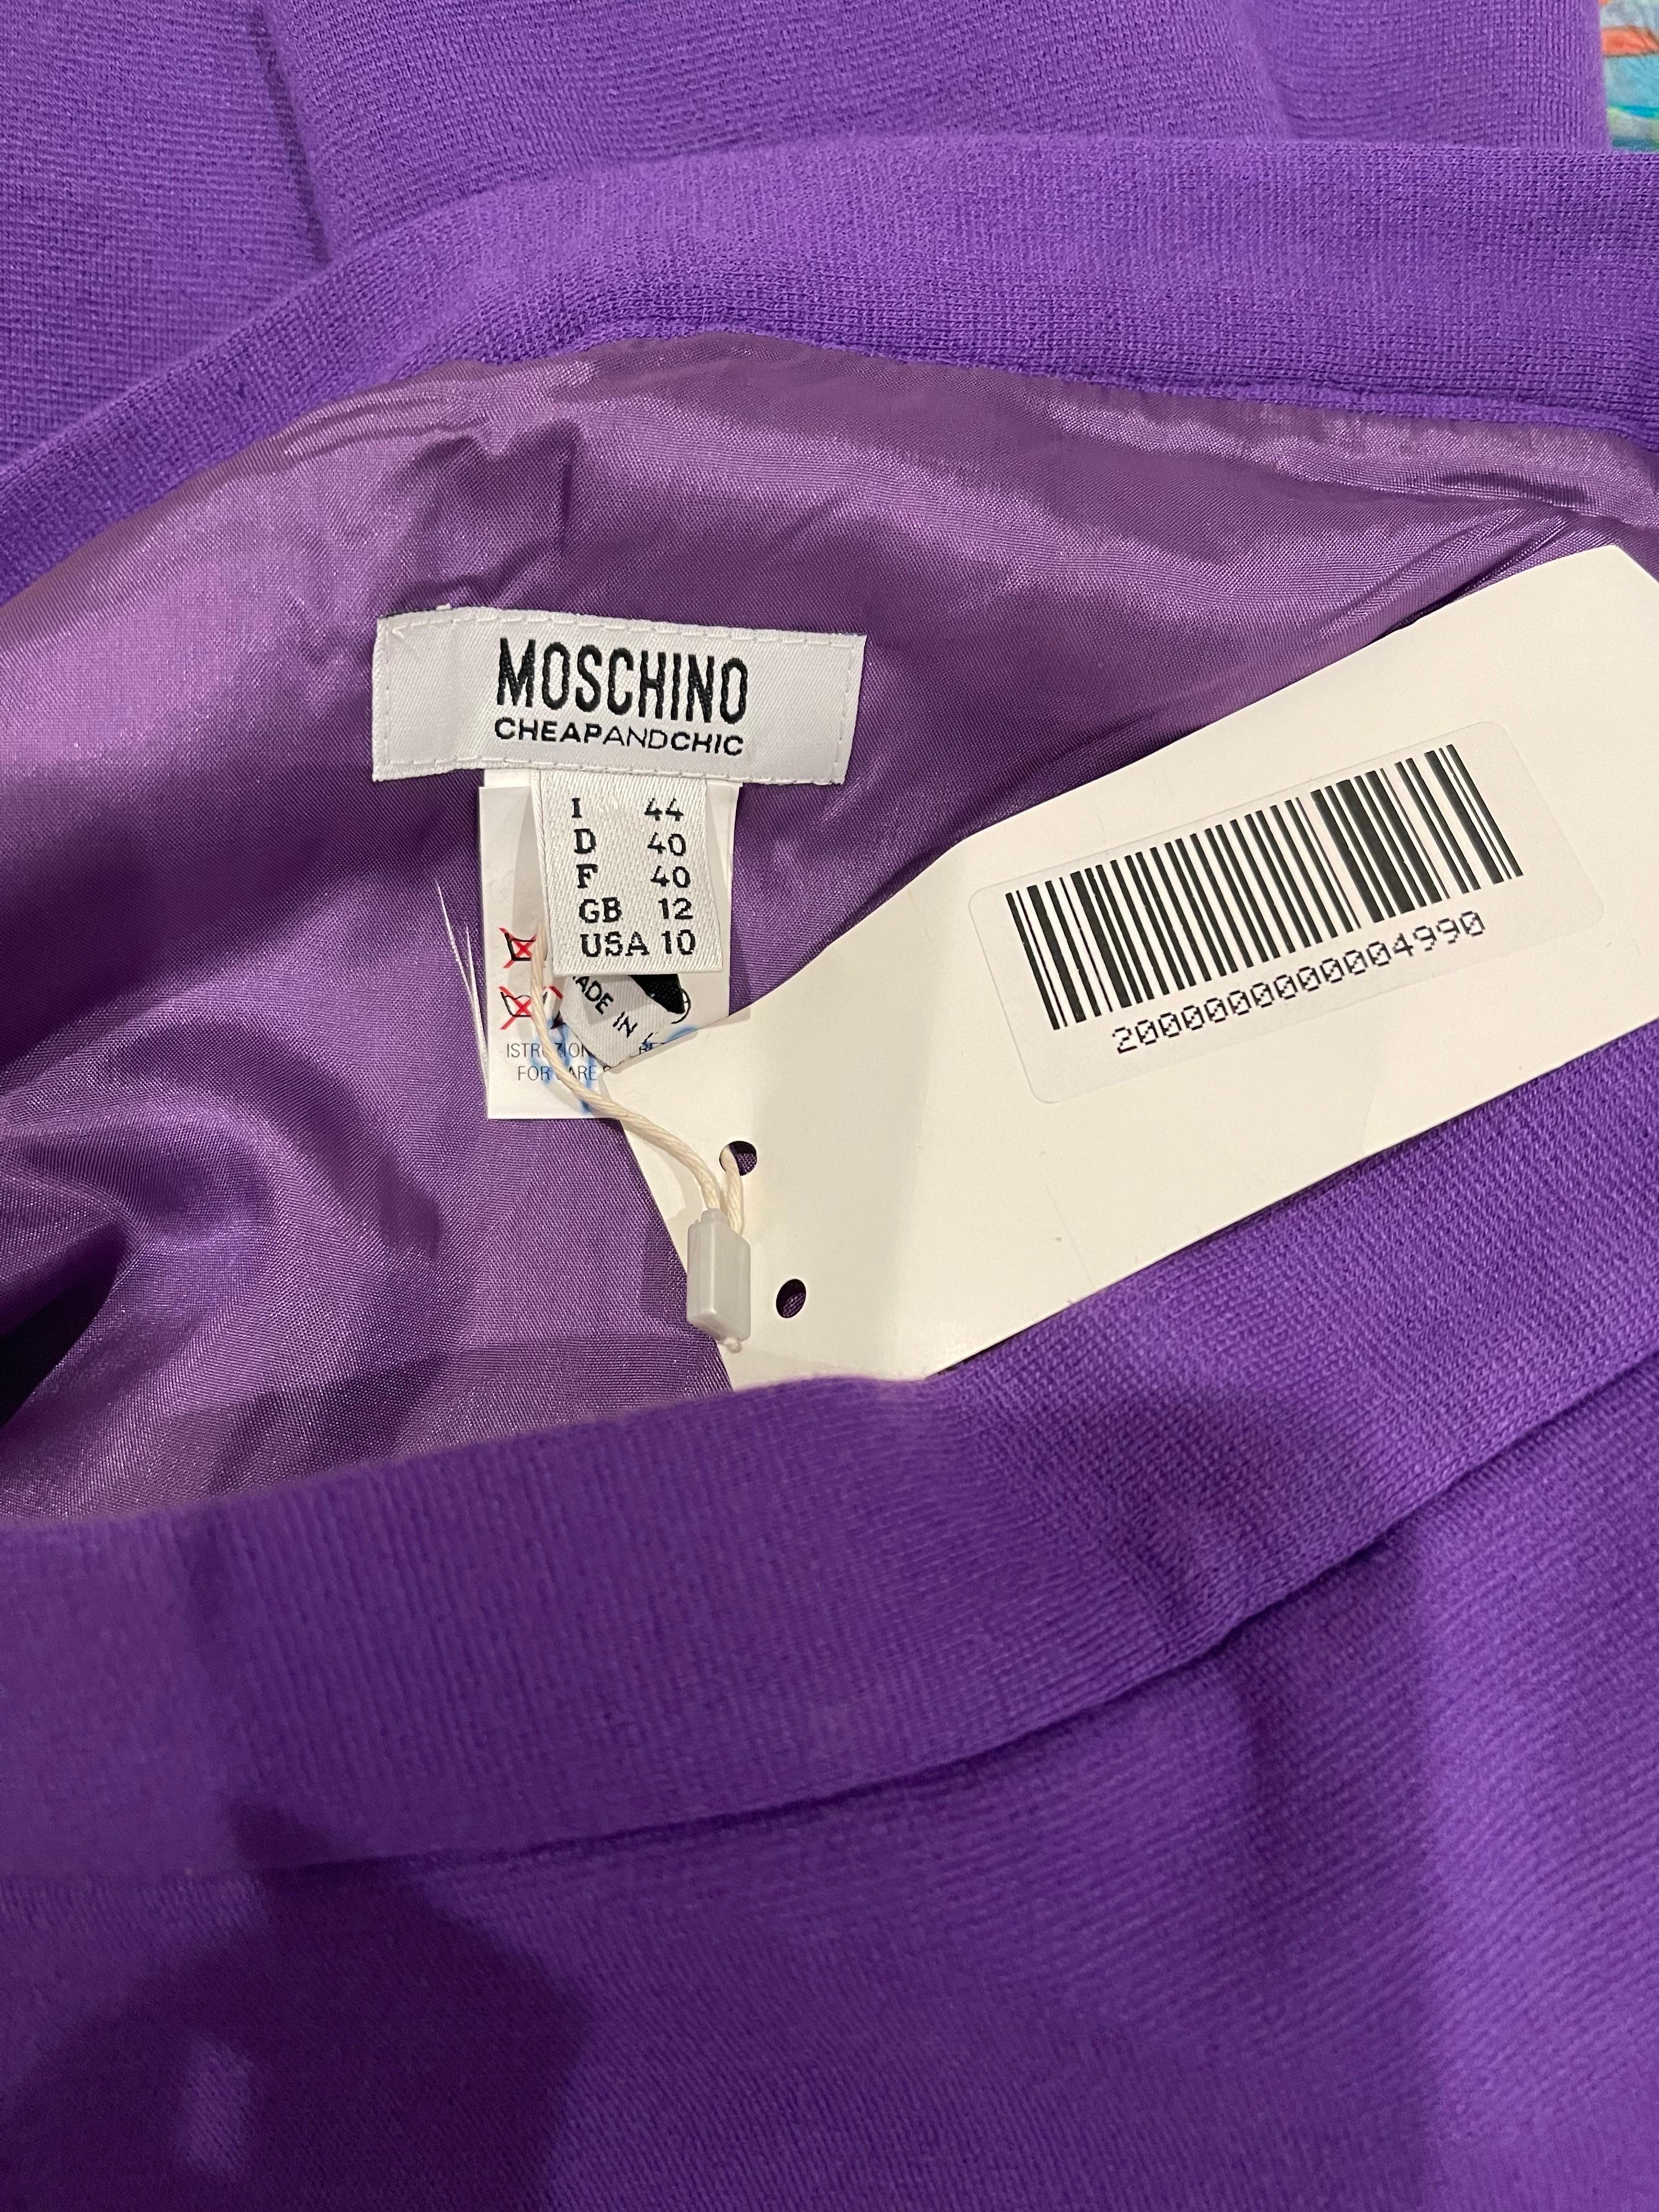 Stylish new with tags MOSCHINO Cheap and Chic purple A-line skirt ! Features a soft rayon blend fabric. Hidden zipper up the back with hook-and-eye closure. Can easily be dressed up or down.
In great unworn condition, with original store tags still